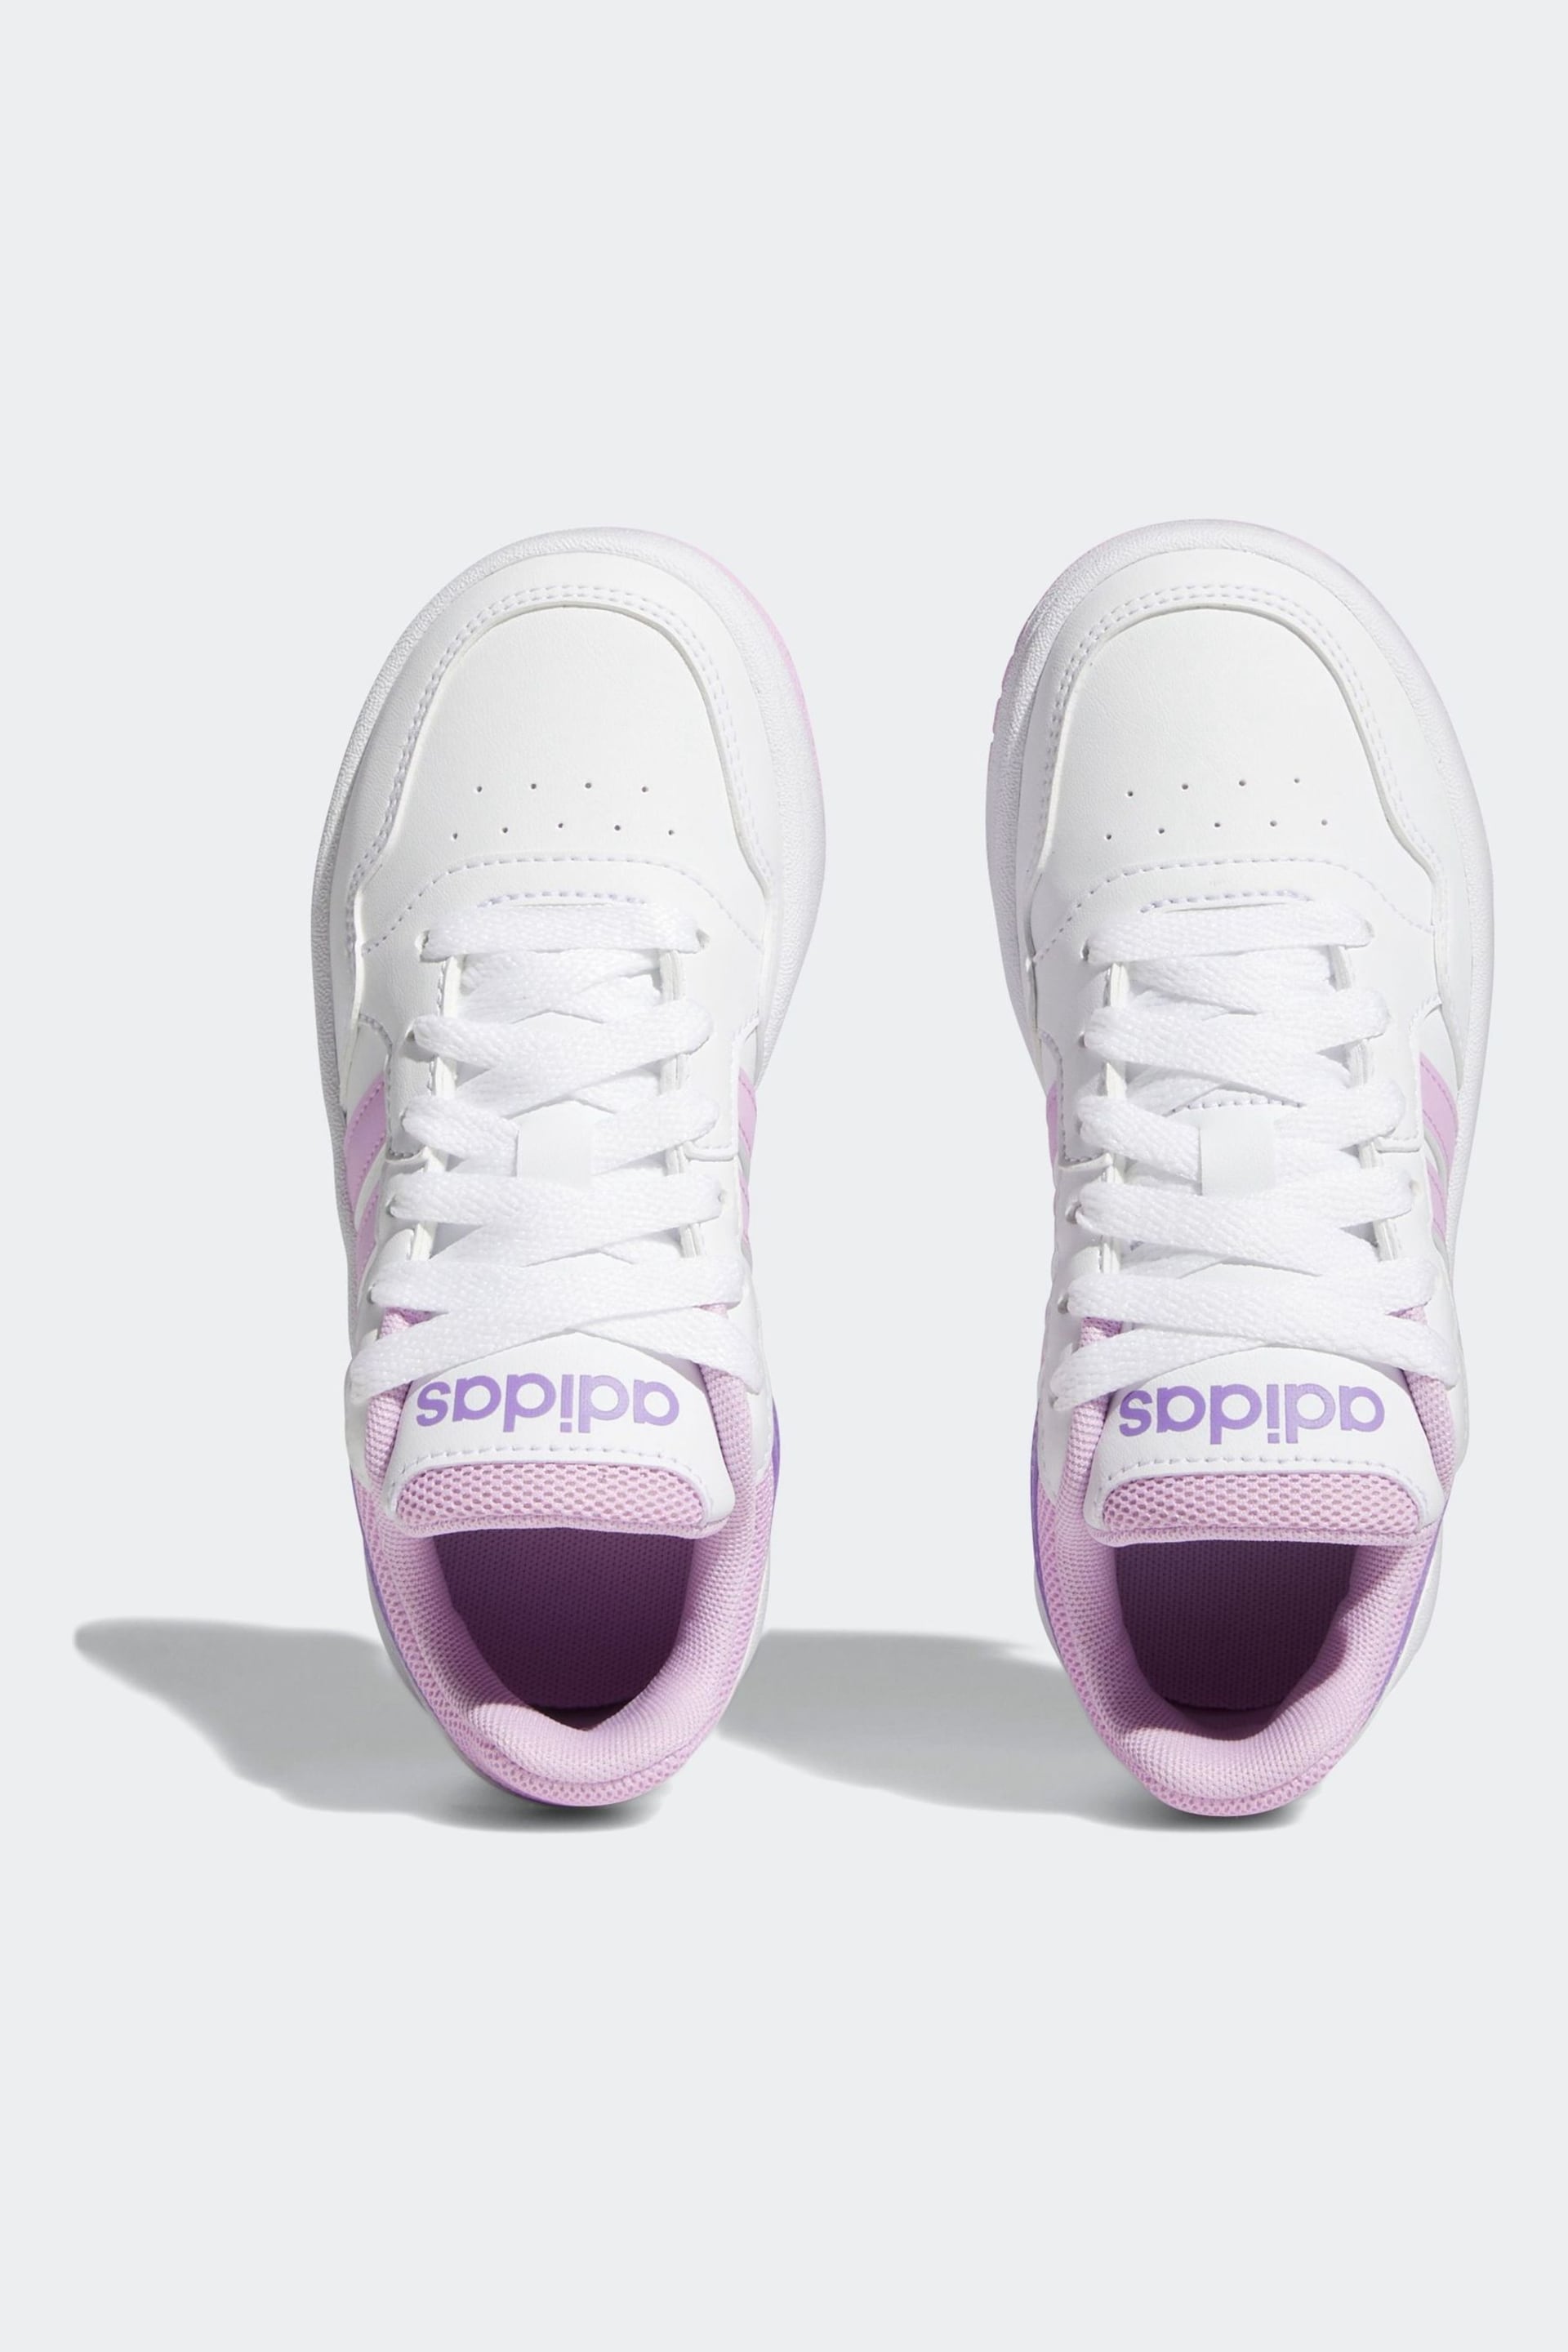 adidas White/purple Hoops Trainers - Image 6 of 9